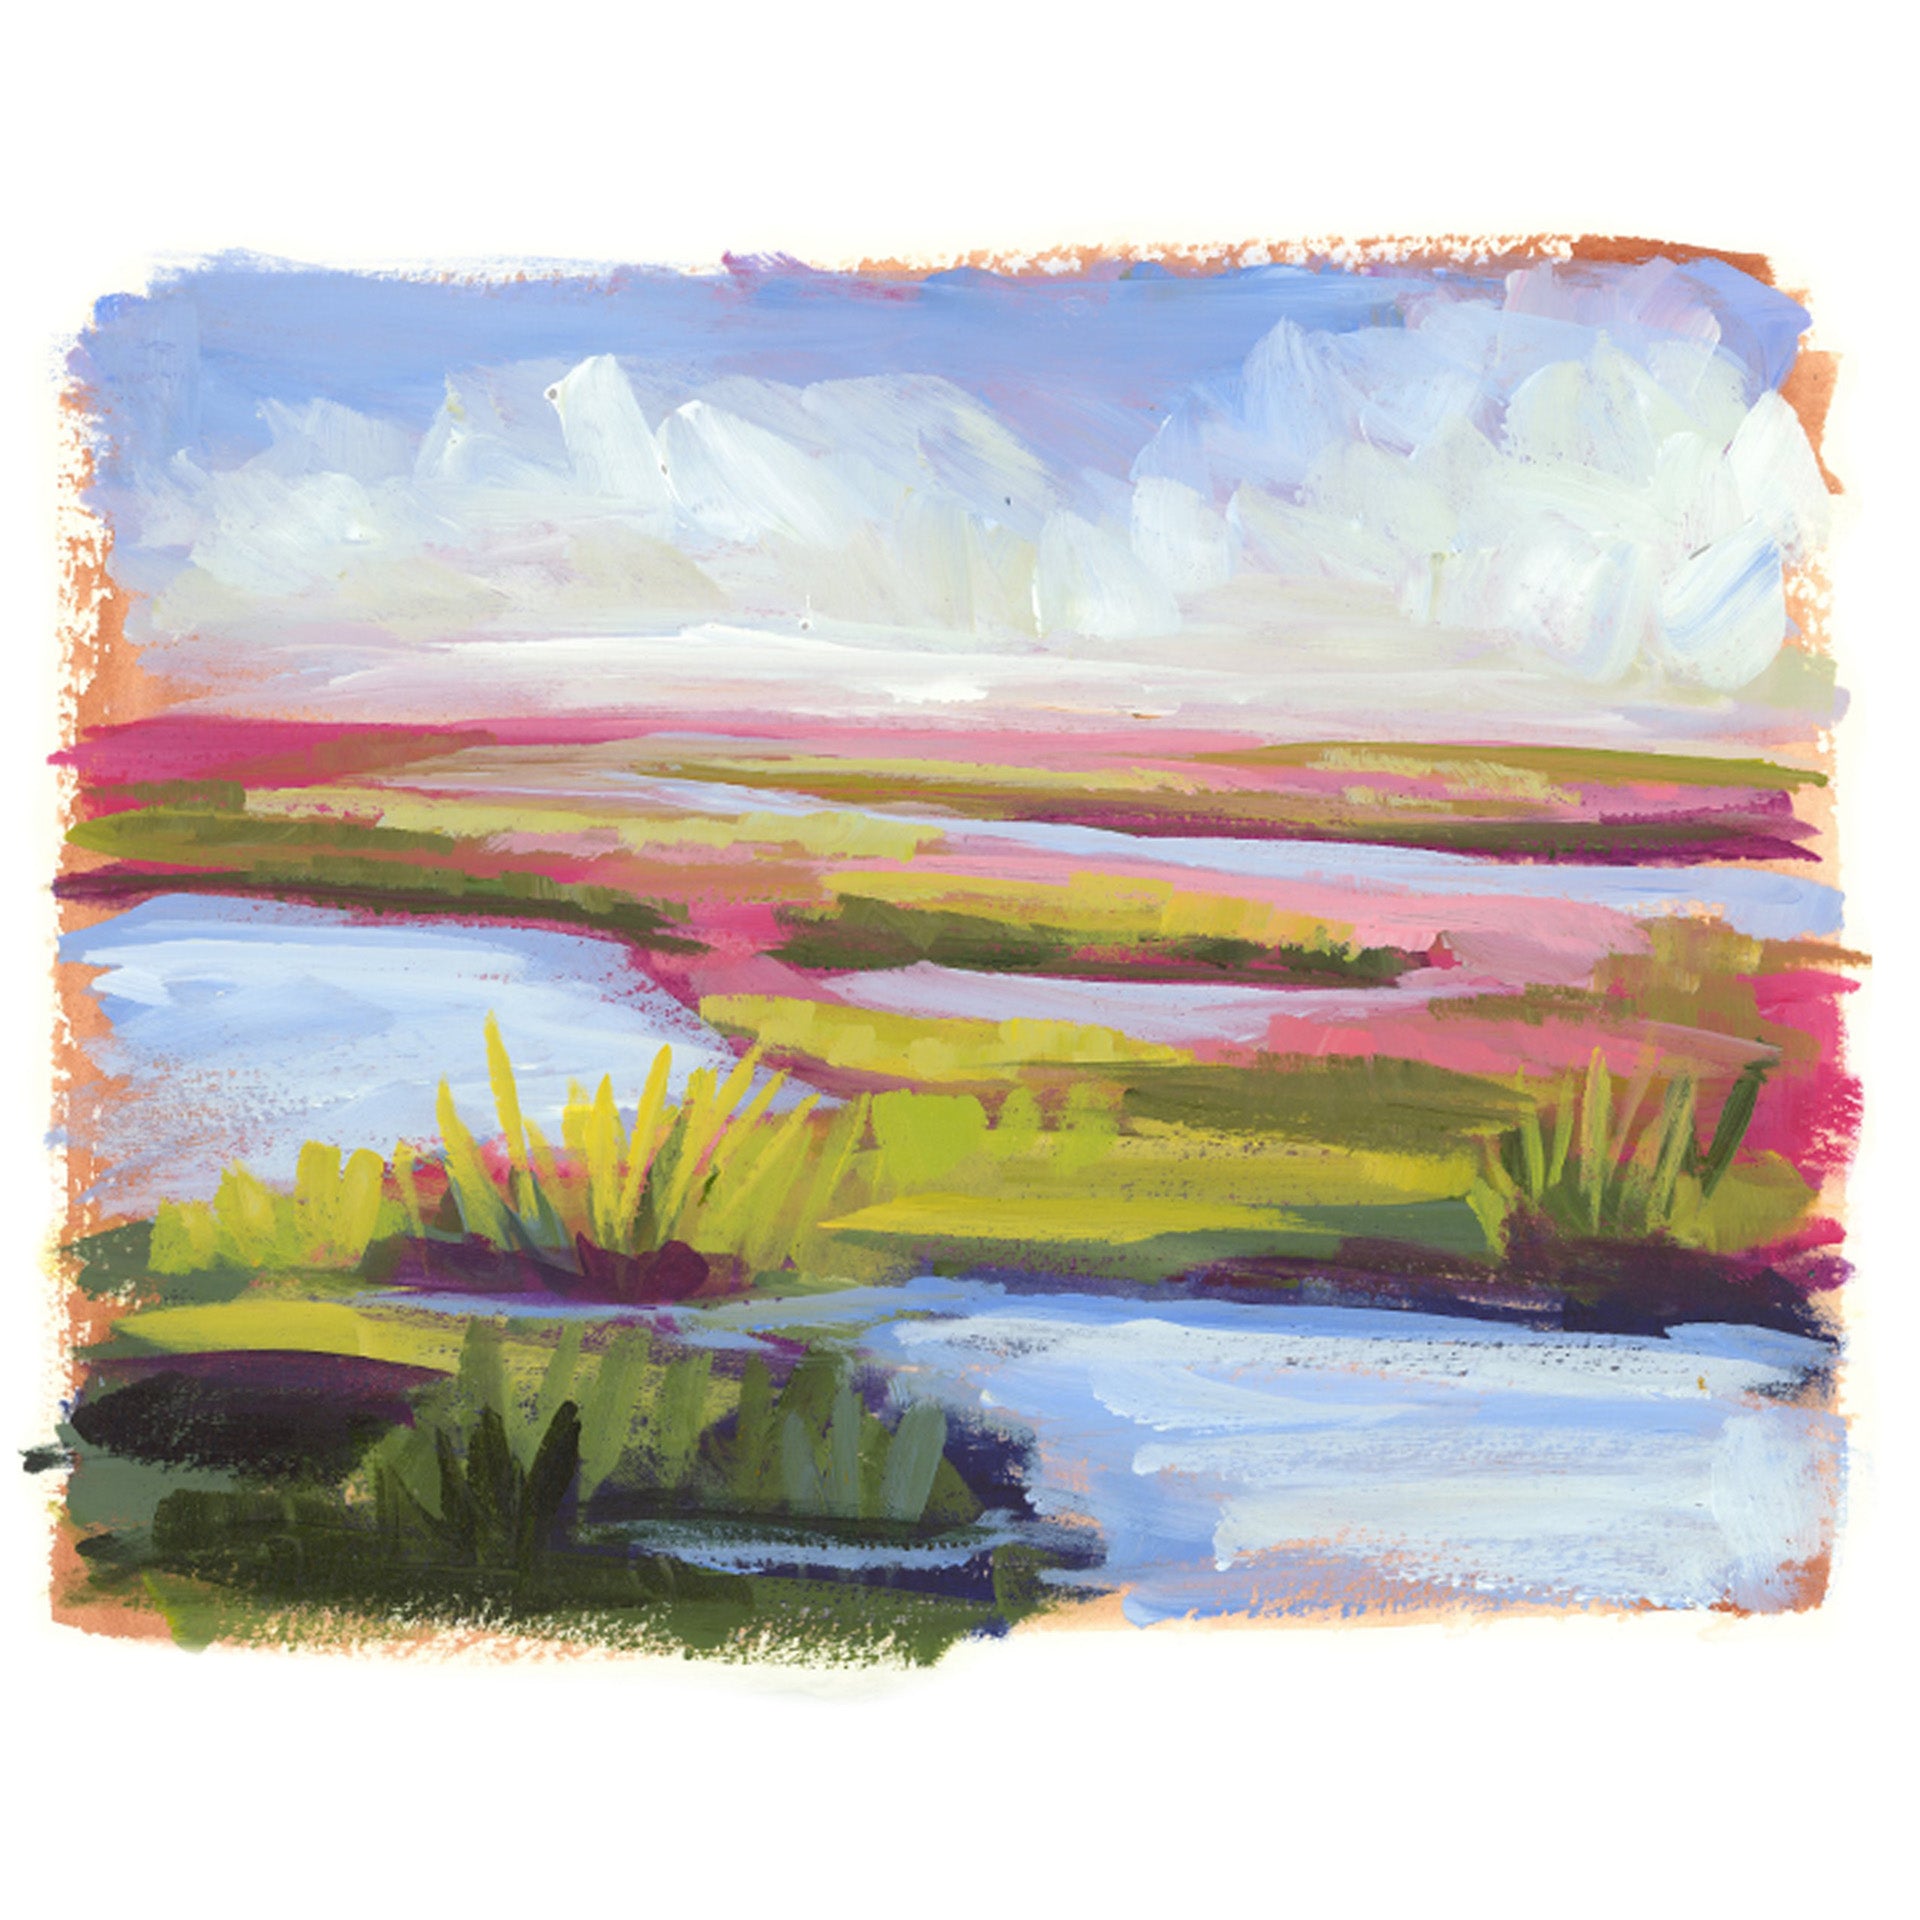 5x7 Note Cards - Summer Sunrise - featured in Art On Fire 2020 - Shelby  Dillon Studio